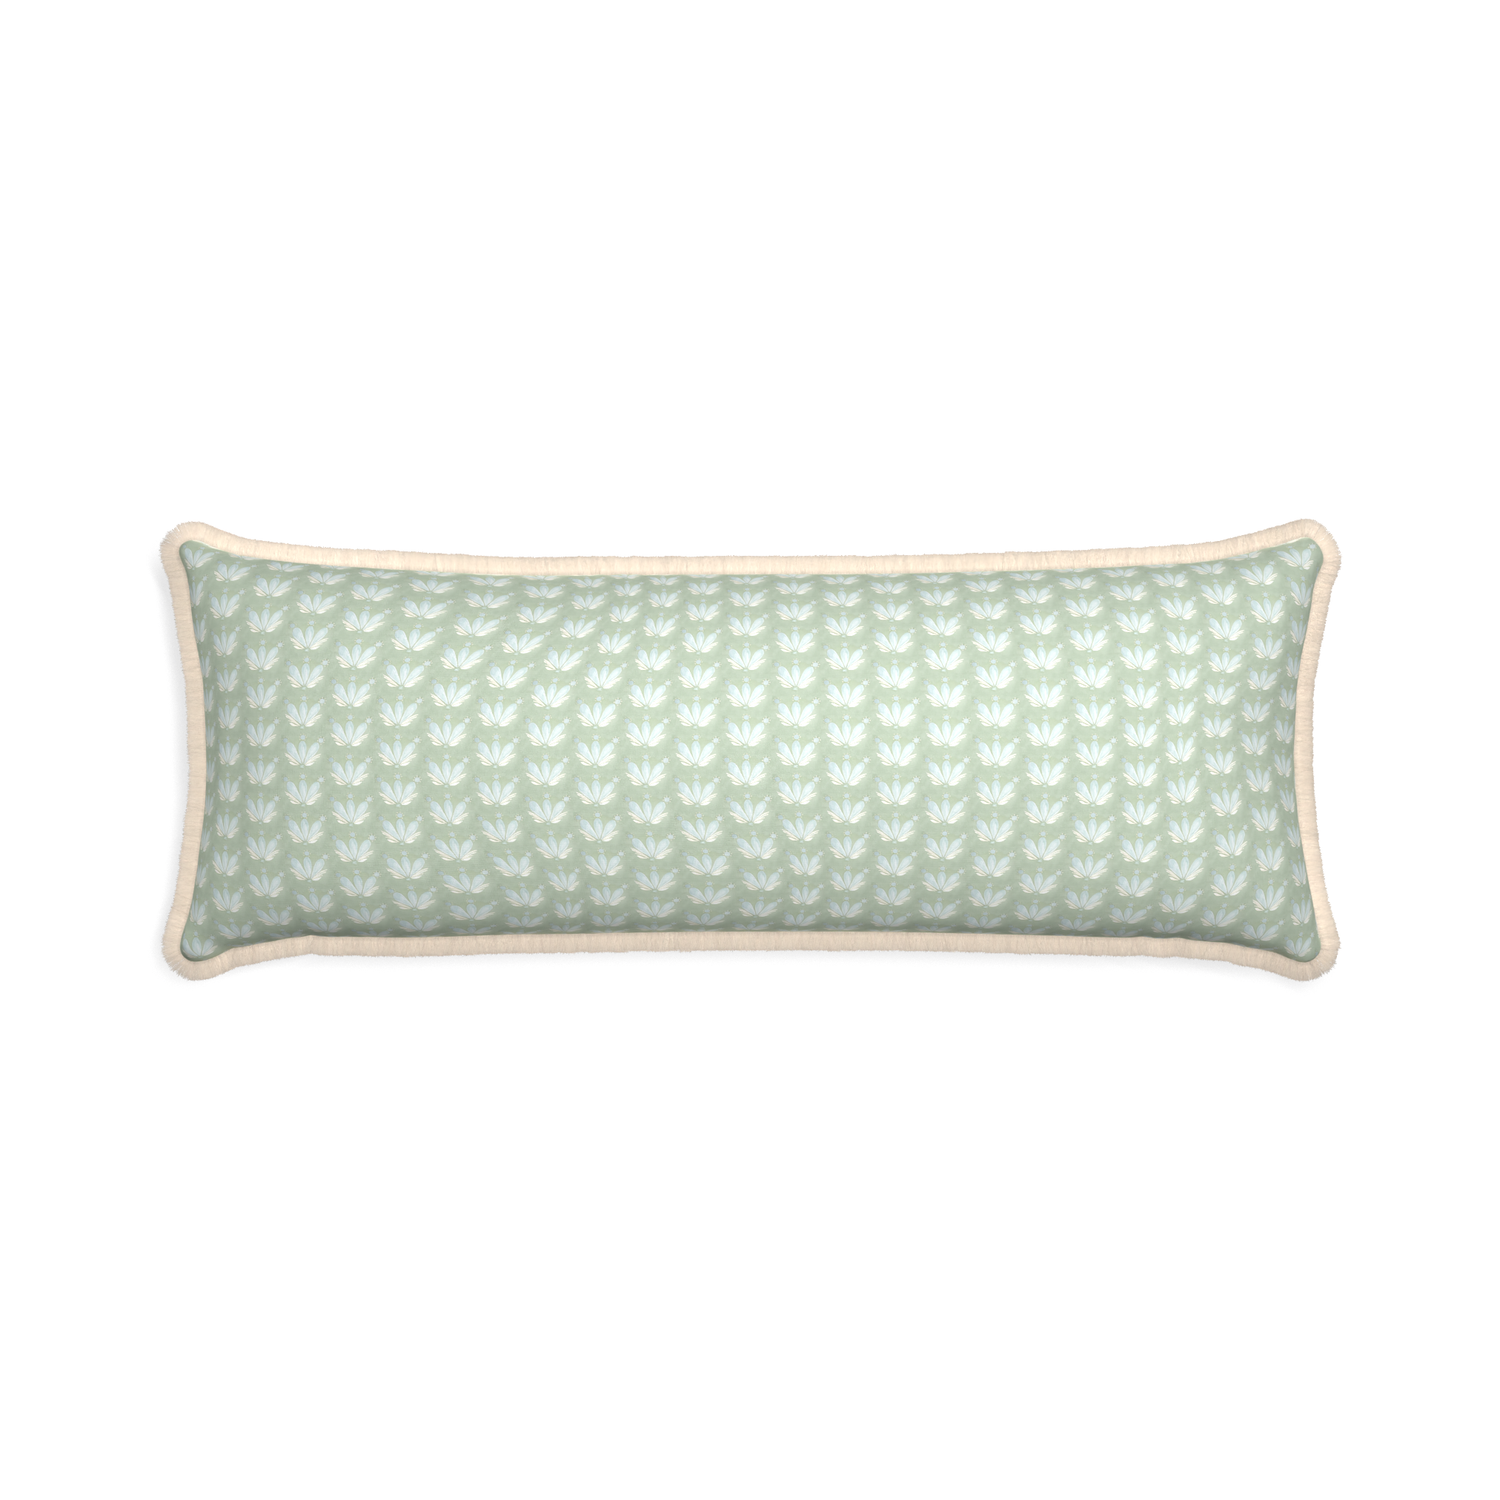 Xl-lumbar serena sea salt custom blue & green floral drop repeatpillow with cream fringe on white background